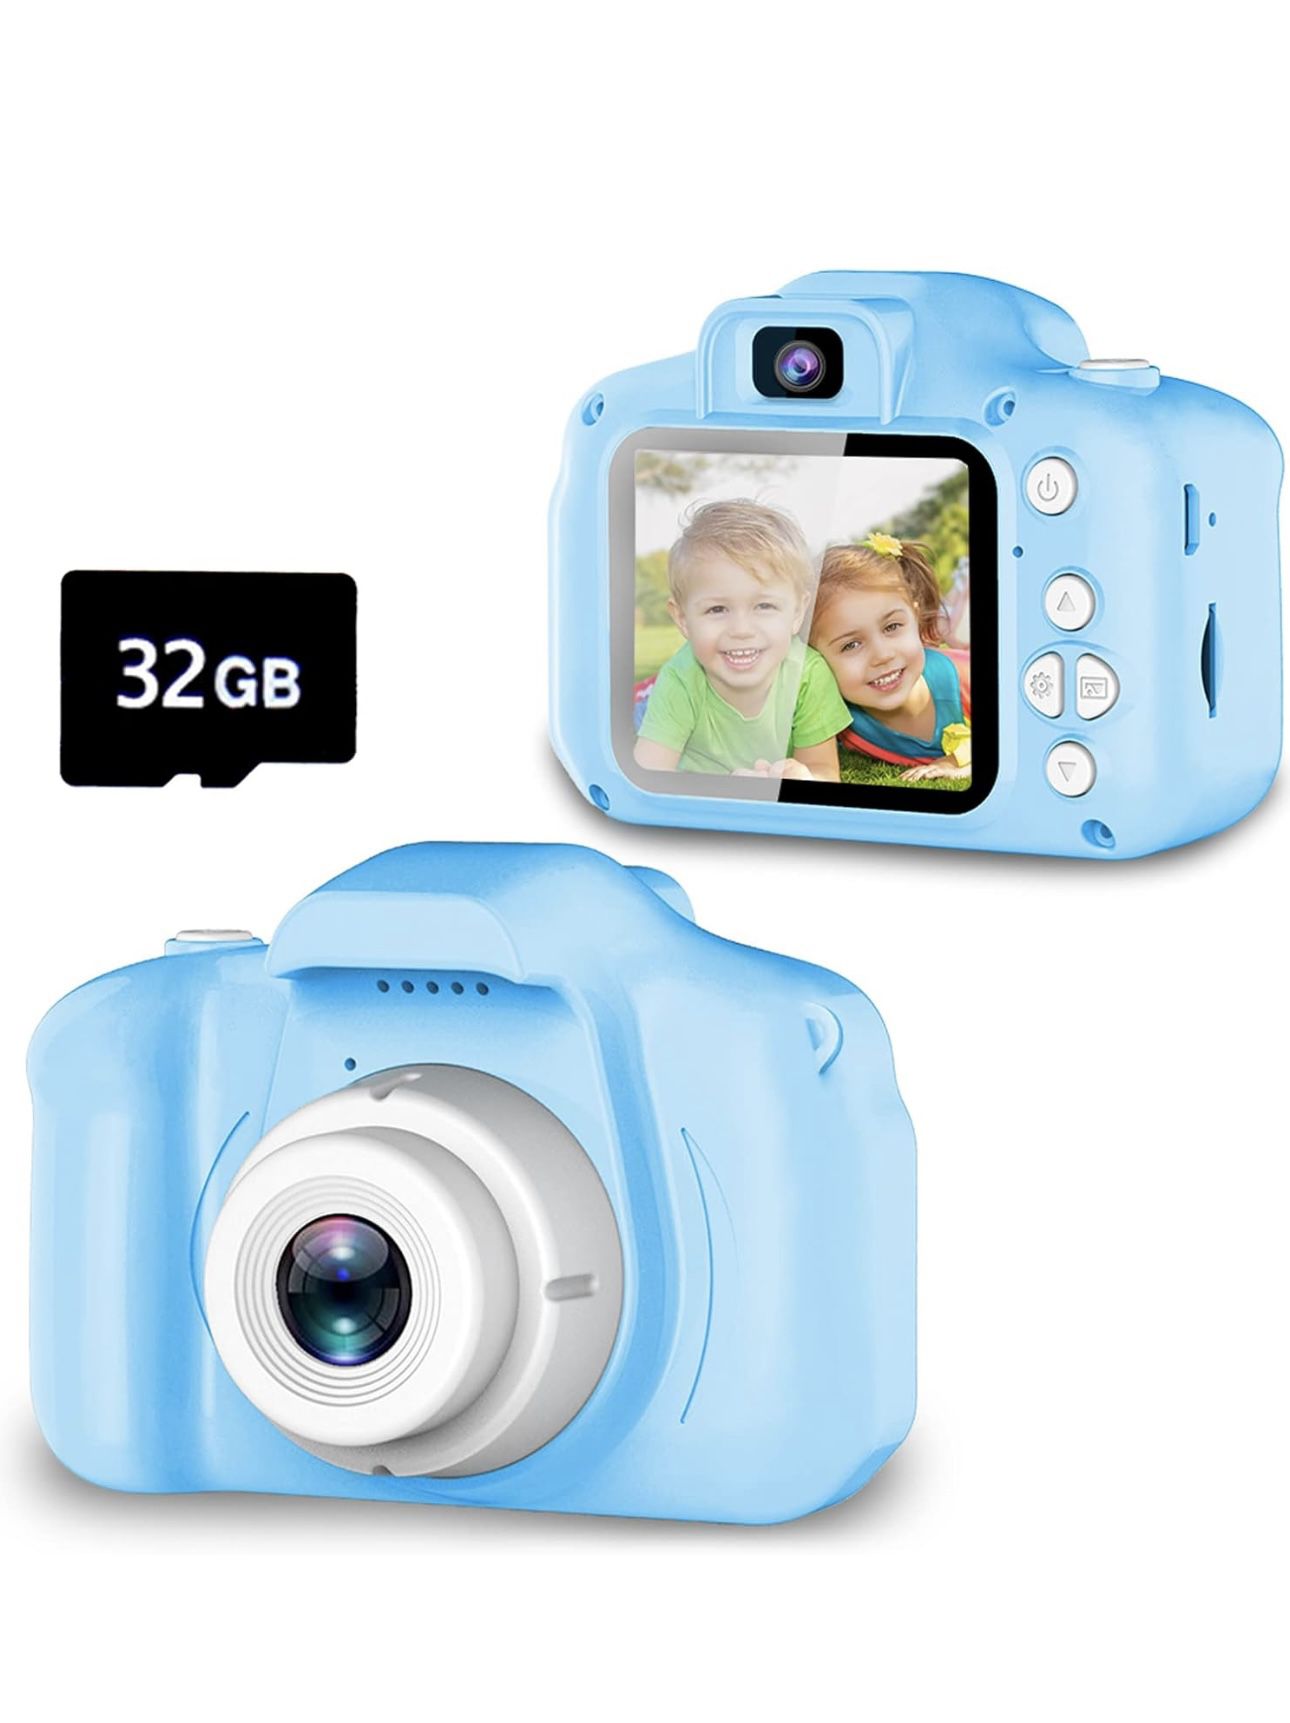 Seckton Upgrade Kids Selfie Camera, Christmas Birthday Gifts for Boys Age 3-9, HD Digital Video Cameras for Toddler, Portable Toy for 3 4 5 6 7 8 Year